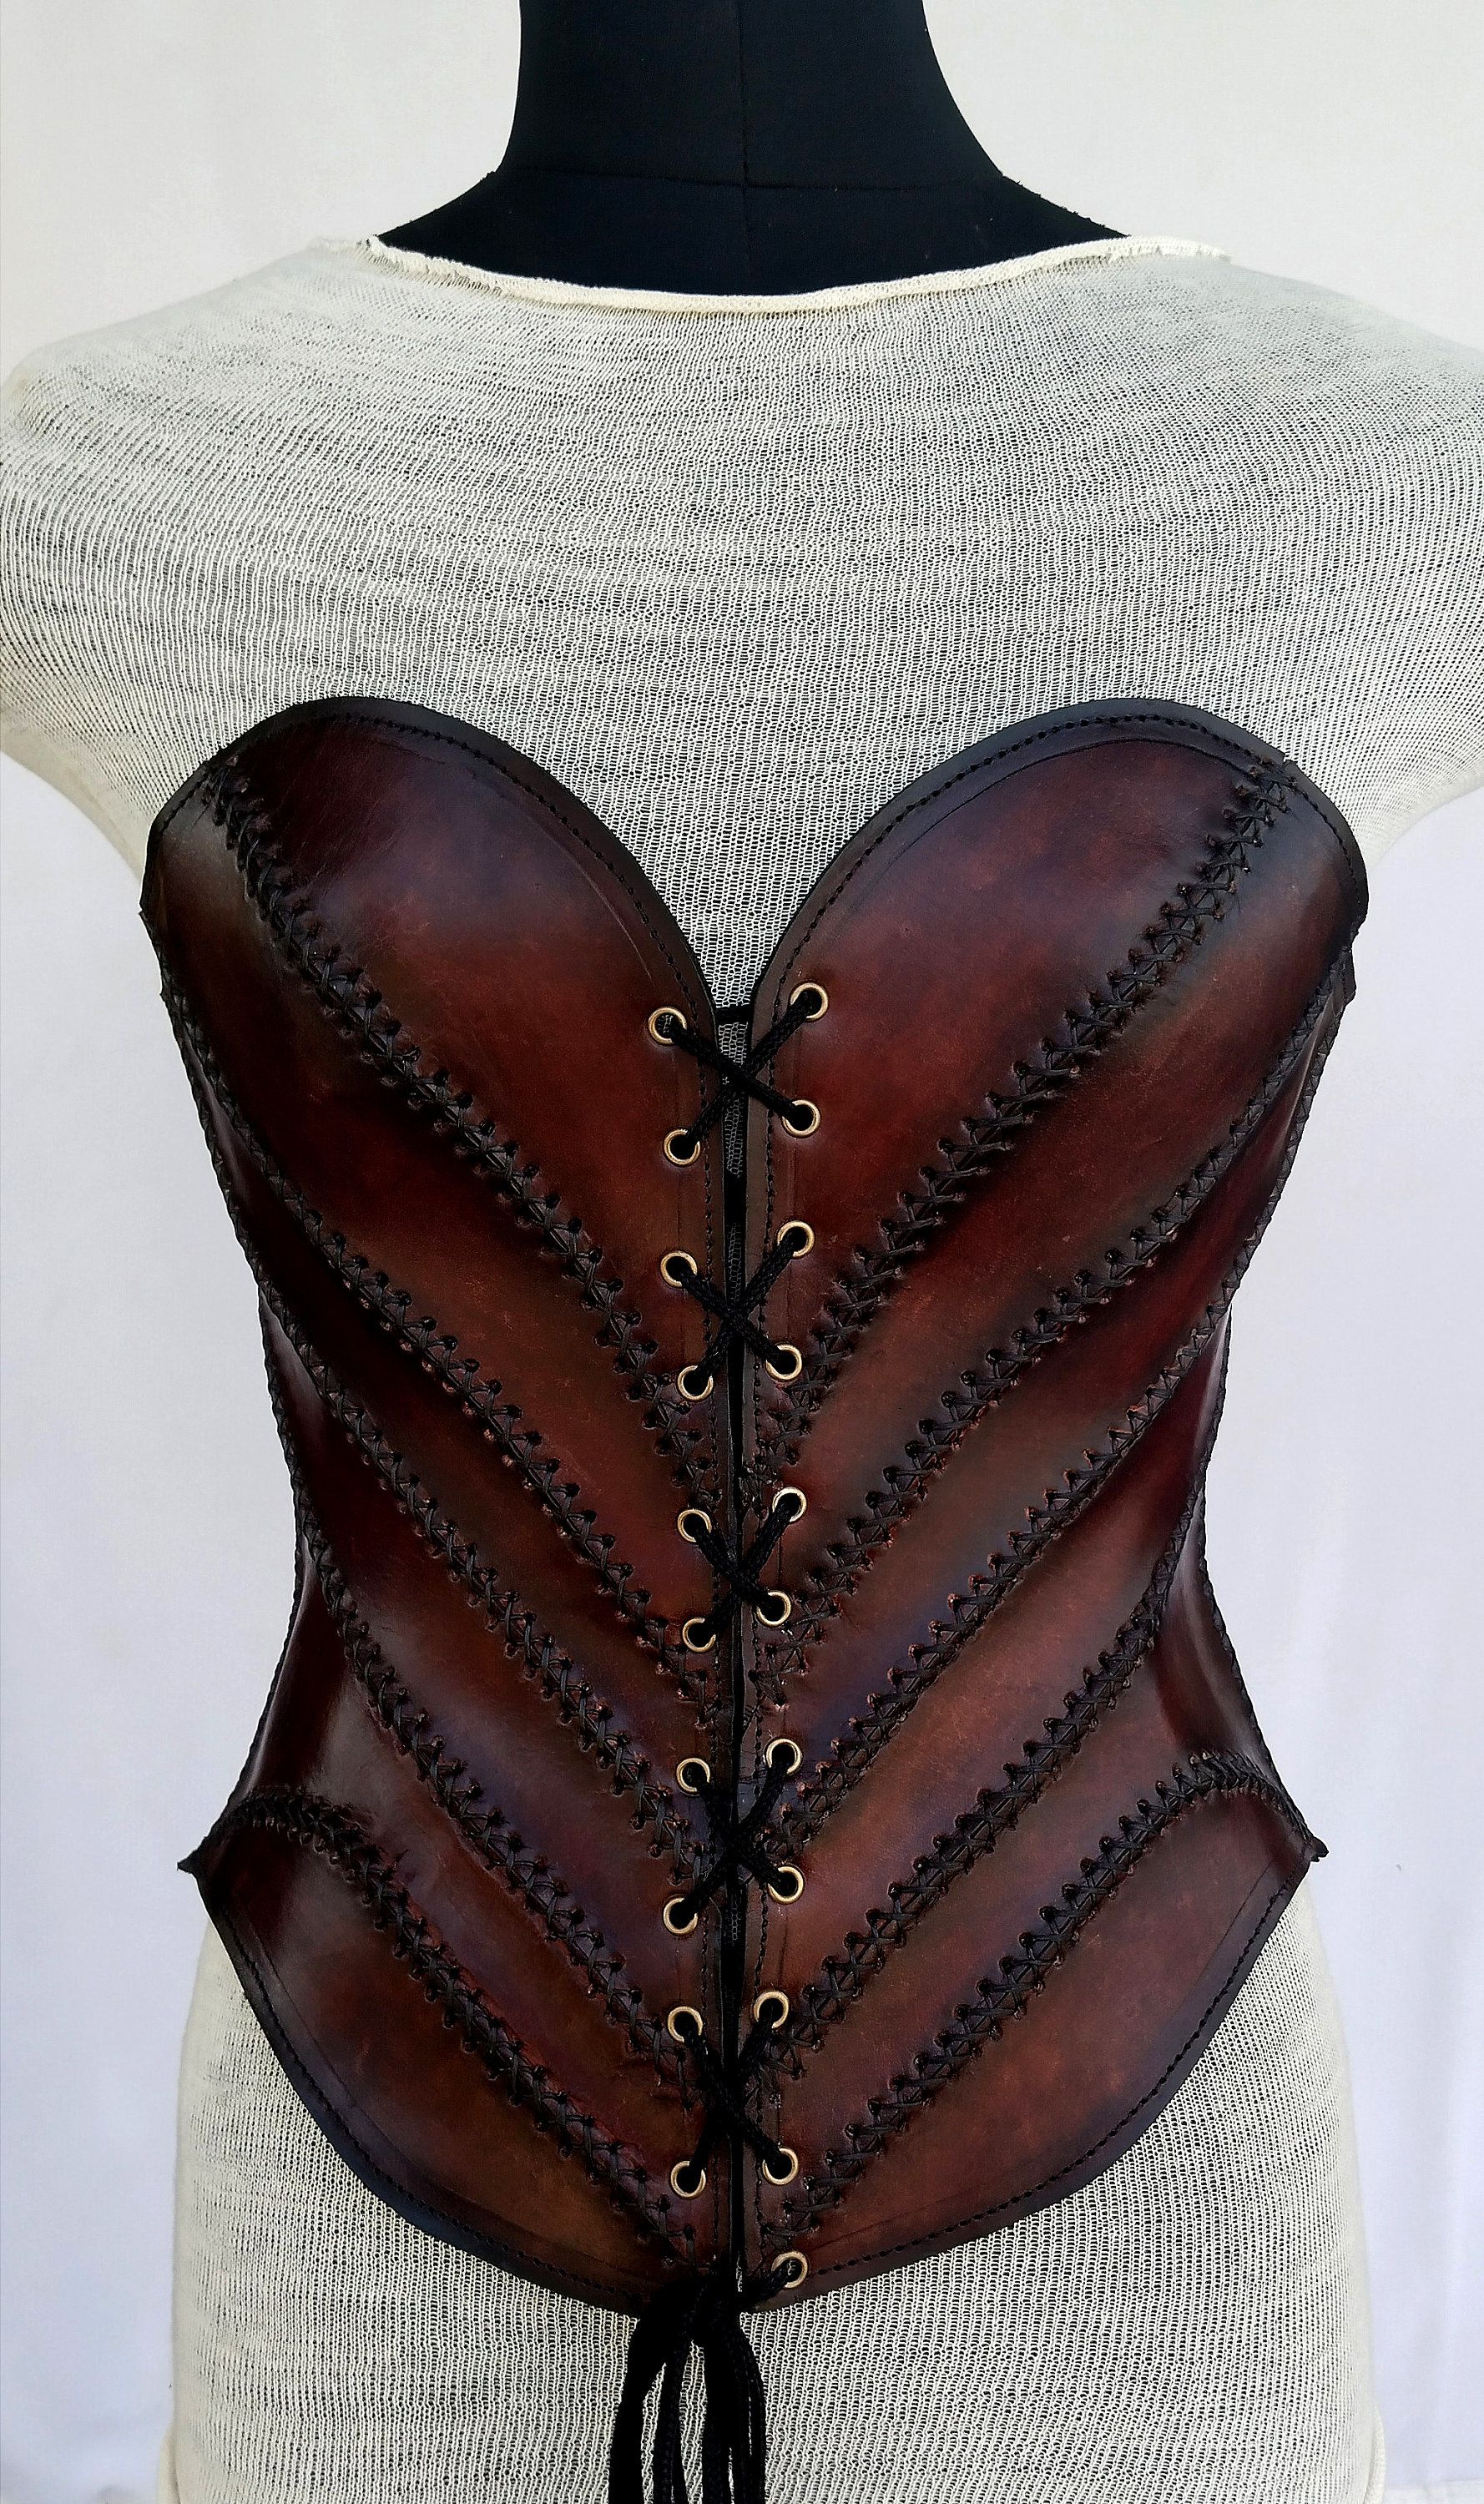 Medieval Leather Corset, LARP Handmade Leather Corset, Viking Leather Corset,  Handmade Armor Antique Brown Leather Over-bust Corset -  Portugal